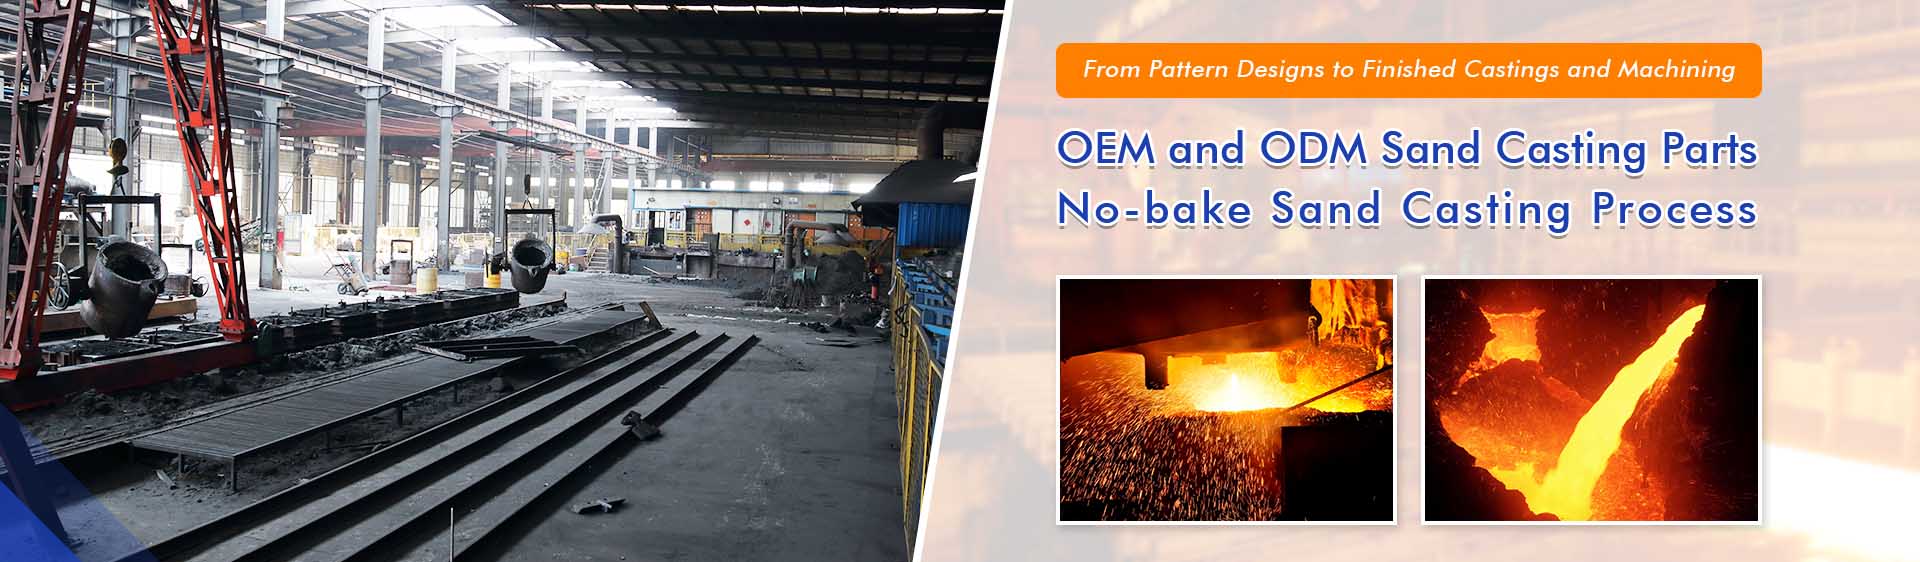 Gray and Ductile Iron Sand Casting Foundry